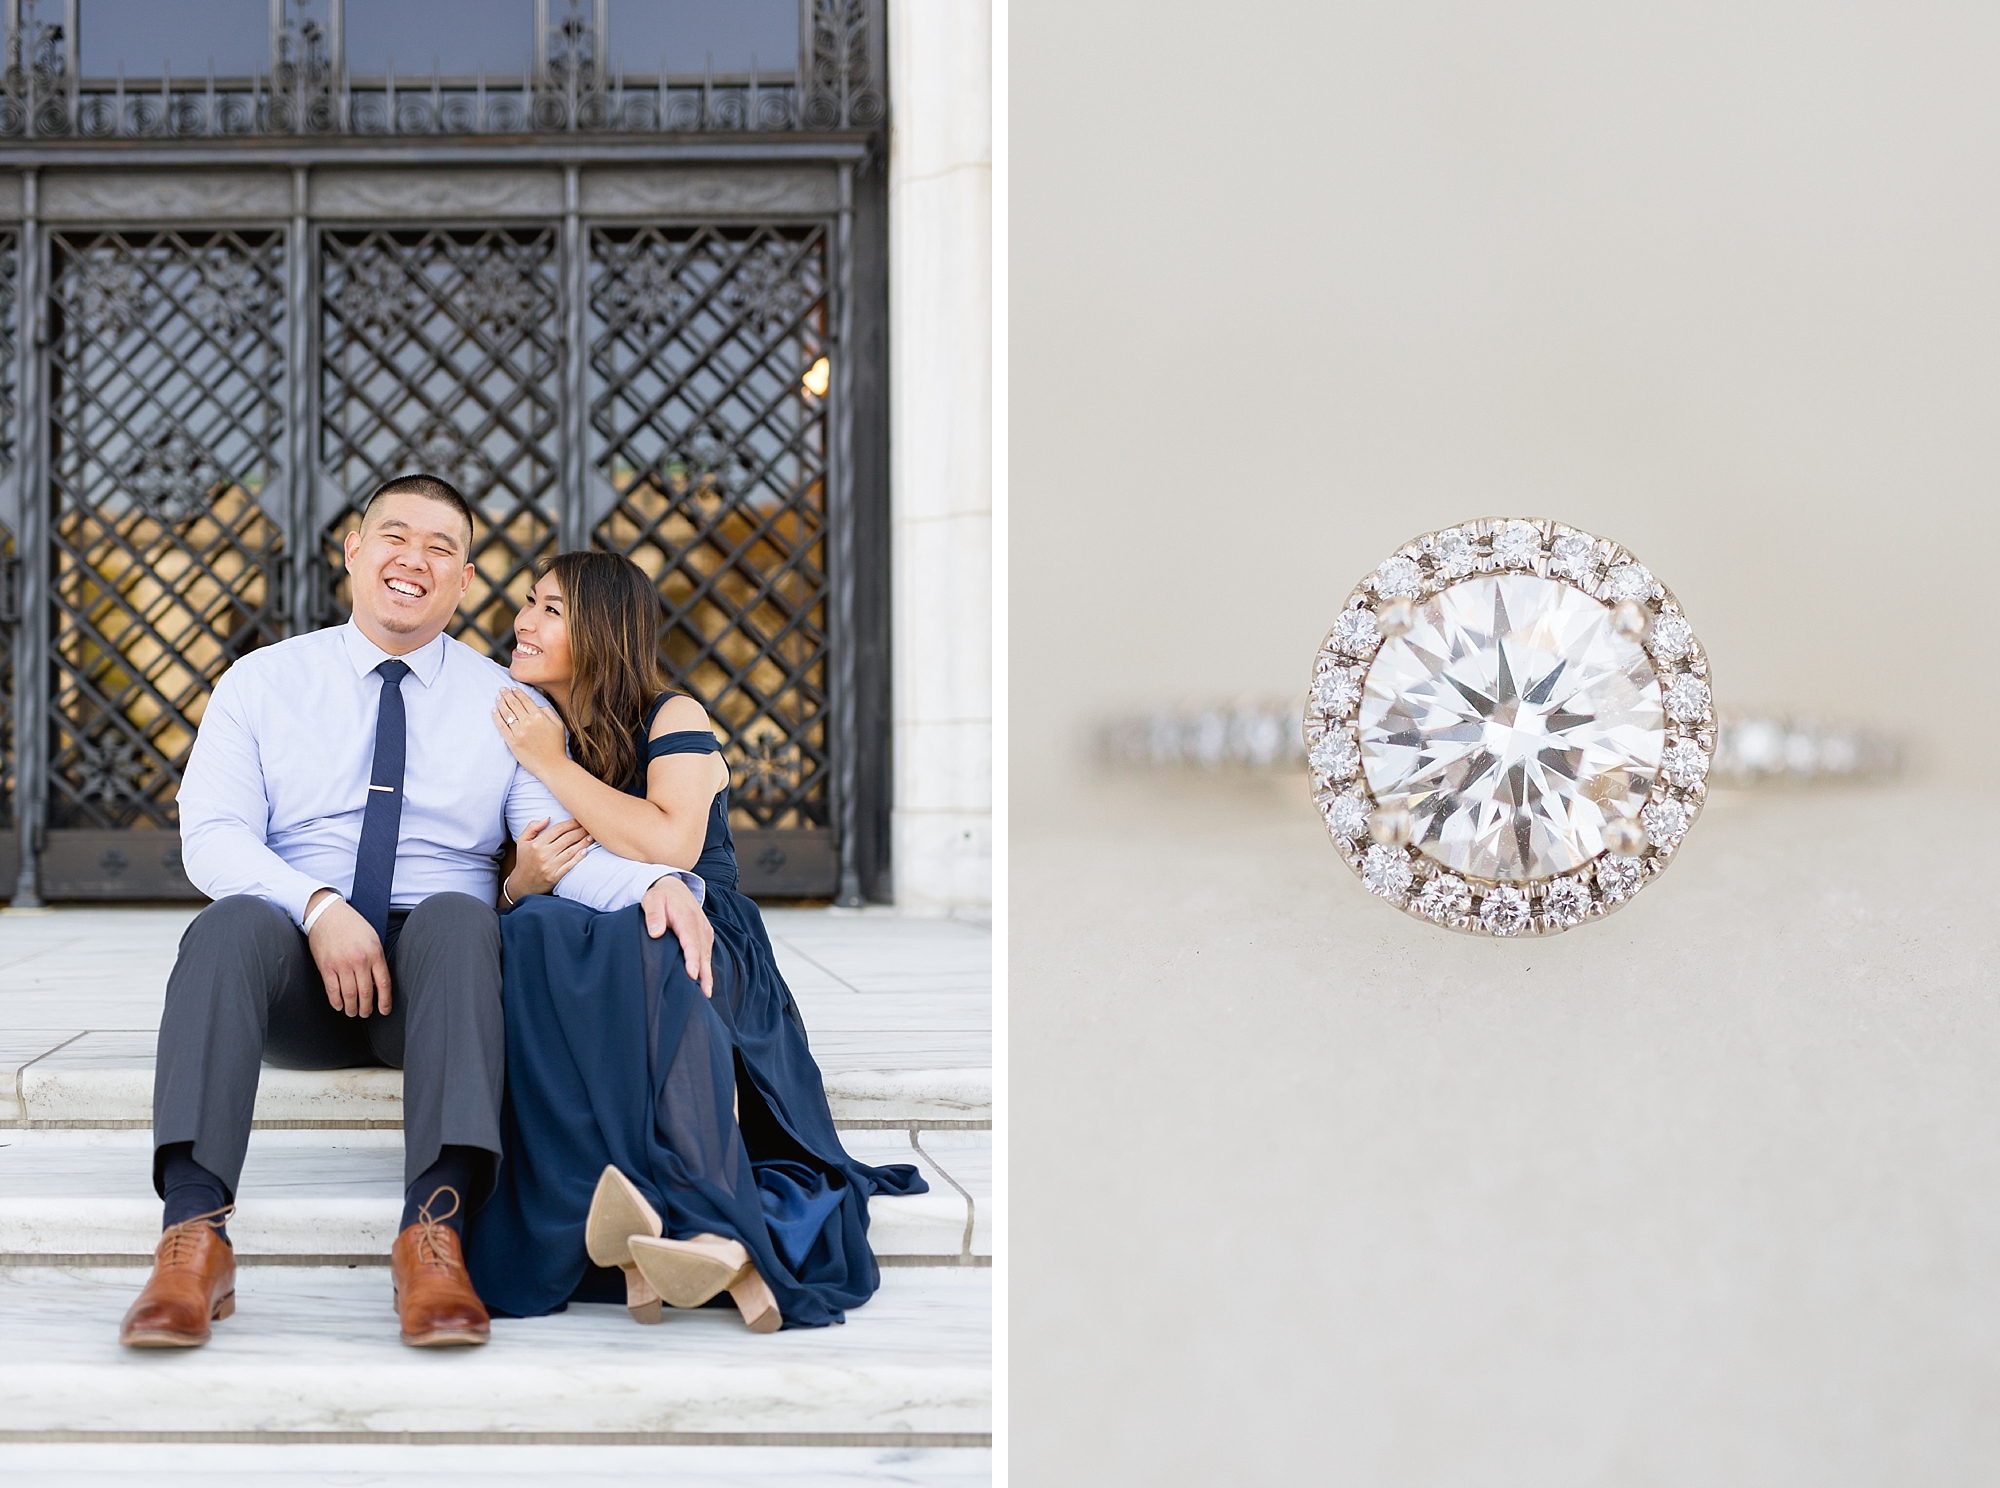 A fun and elegant sunrise engagement at the Detroit Institute of Arts in Downtown Detroit, Michigan by Breanne Rochelle Photography.